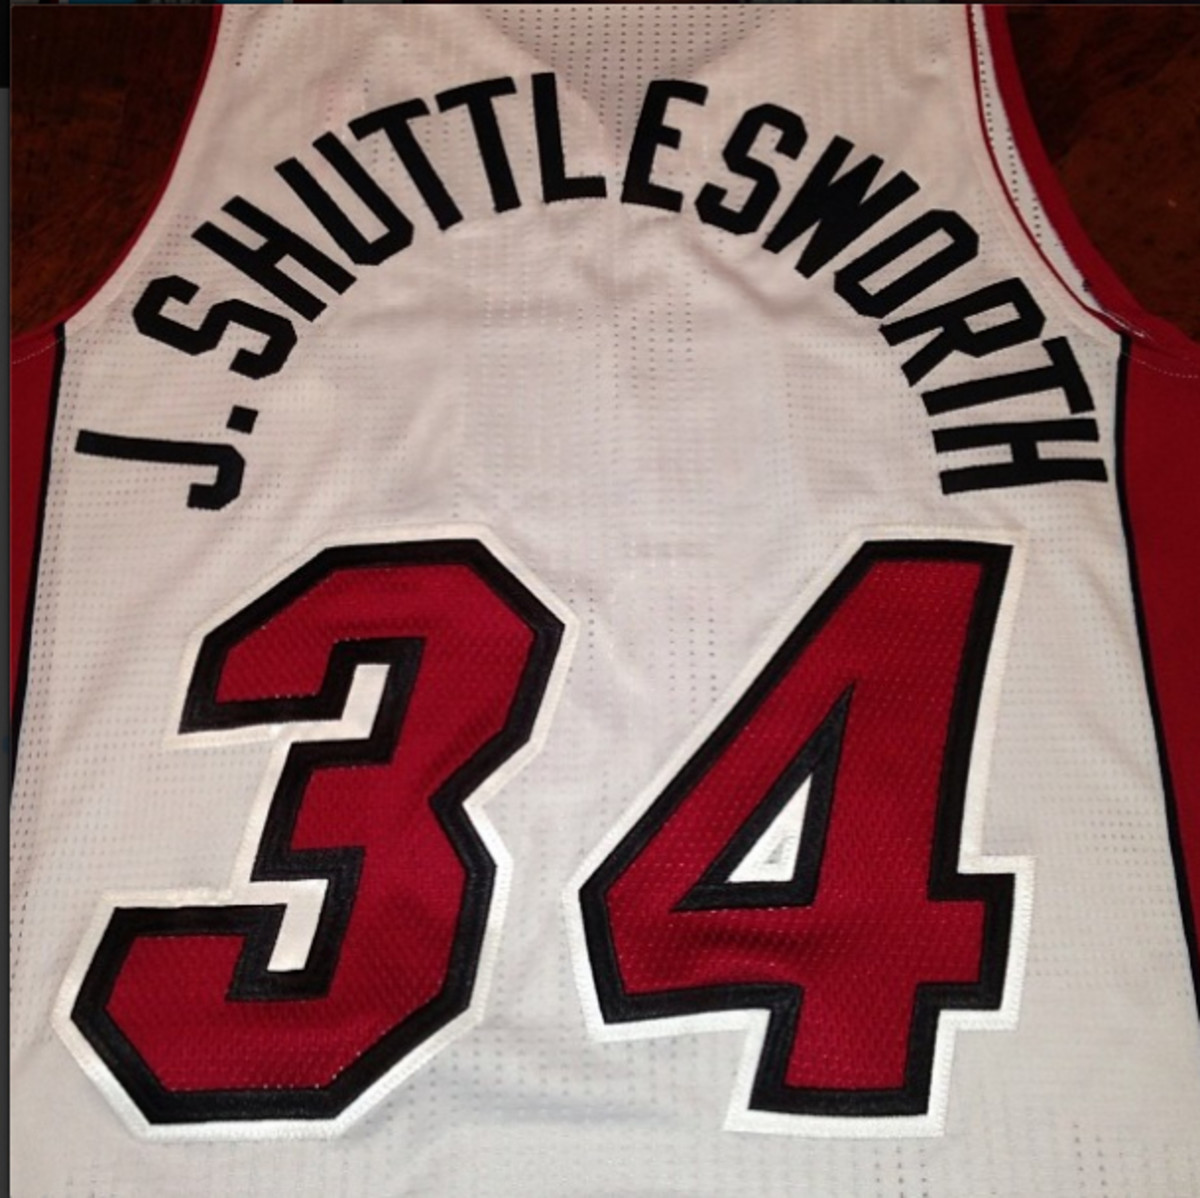 Ray Allen – who played Jesus Shuttlesworth in the 1998 film He Got Game – will don the character-inspired nickname on the back of his jersey this season. (Spike Lee's Instagram)